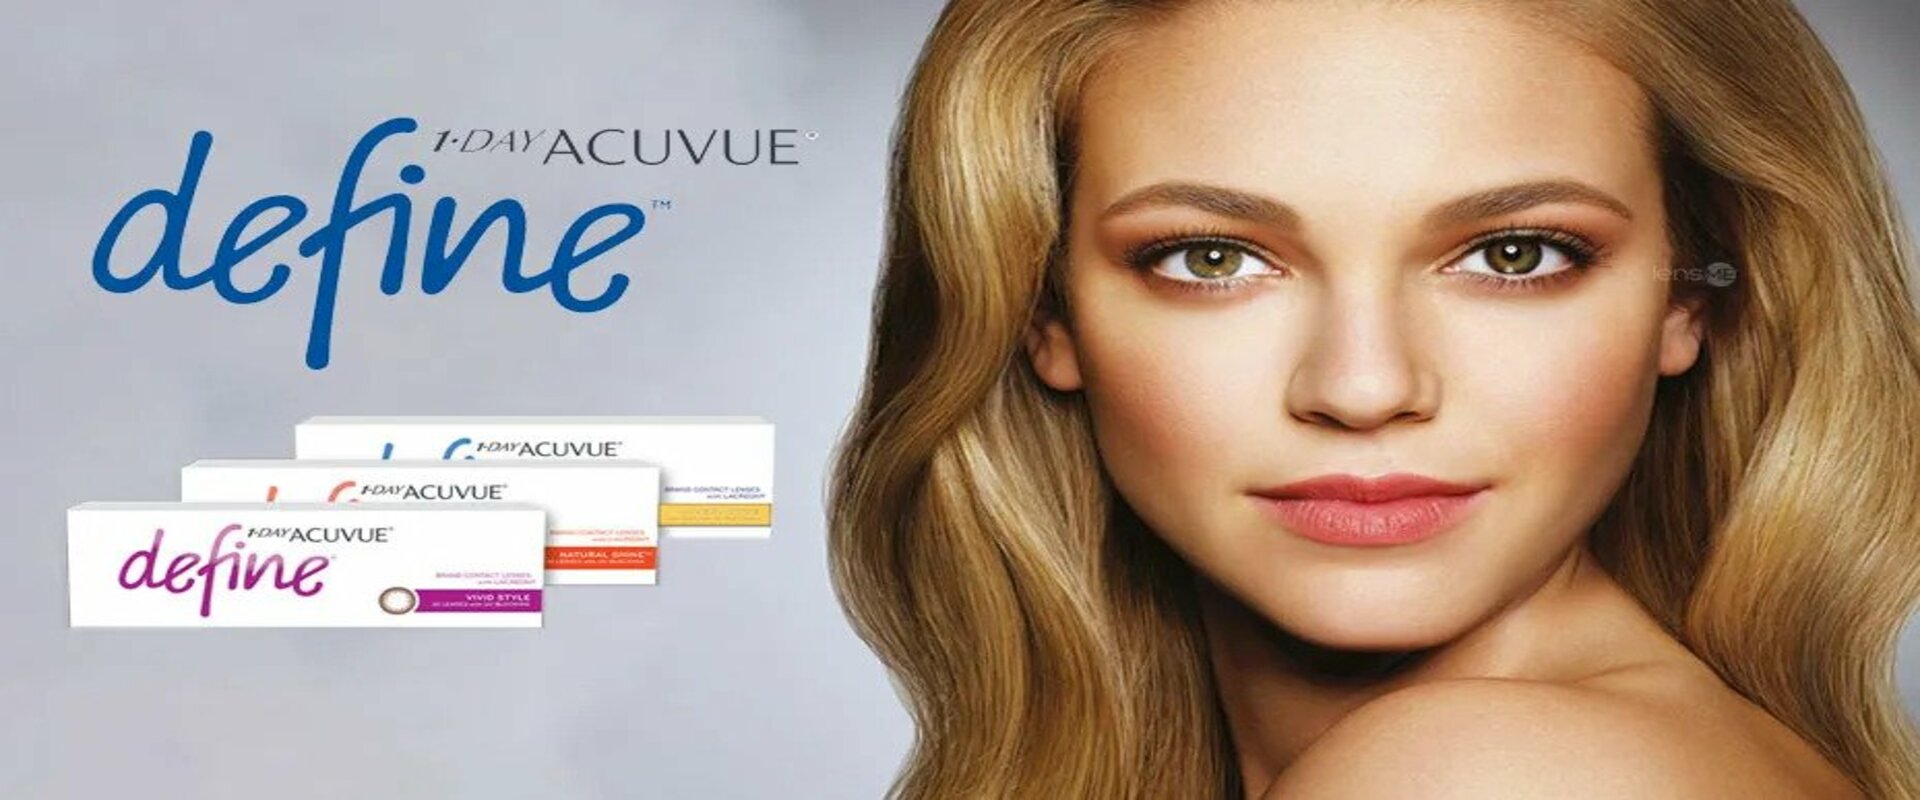 Acuvue Colors